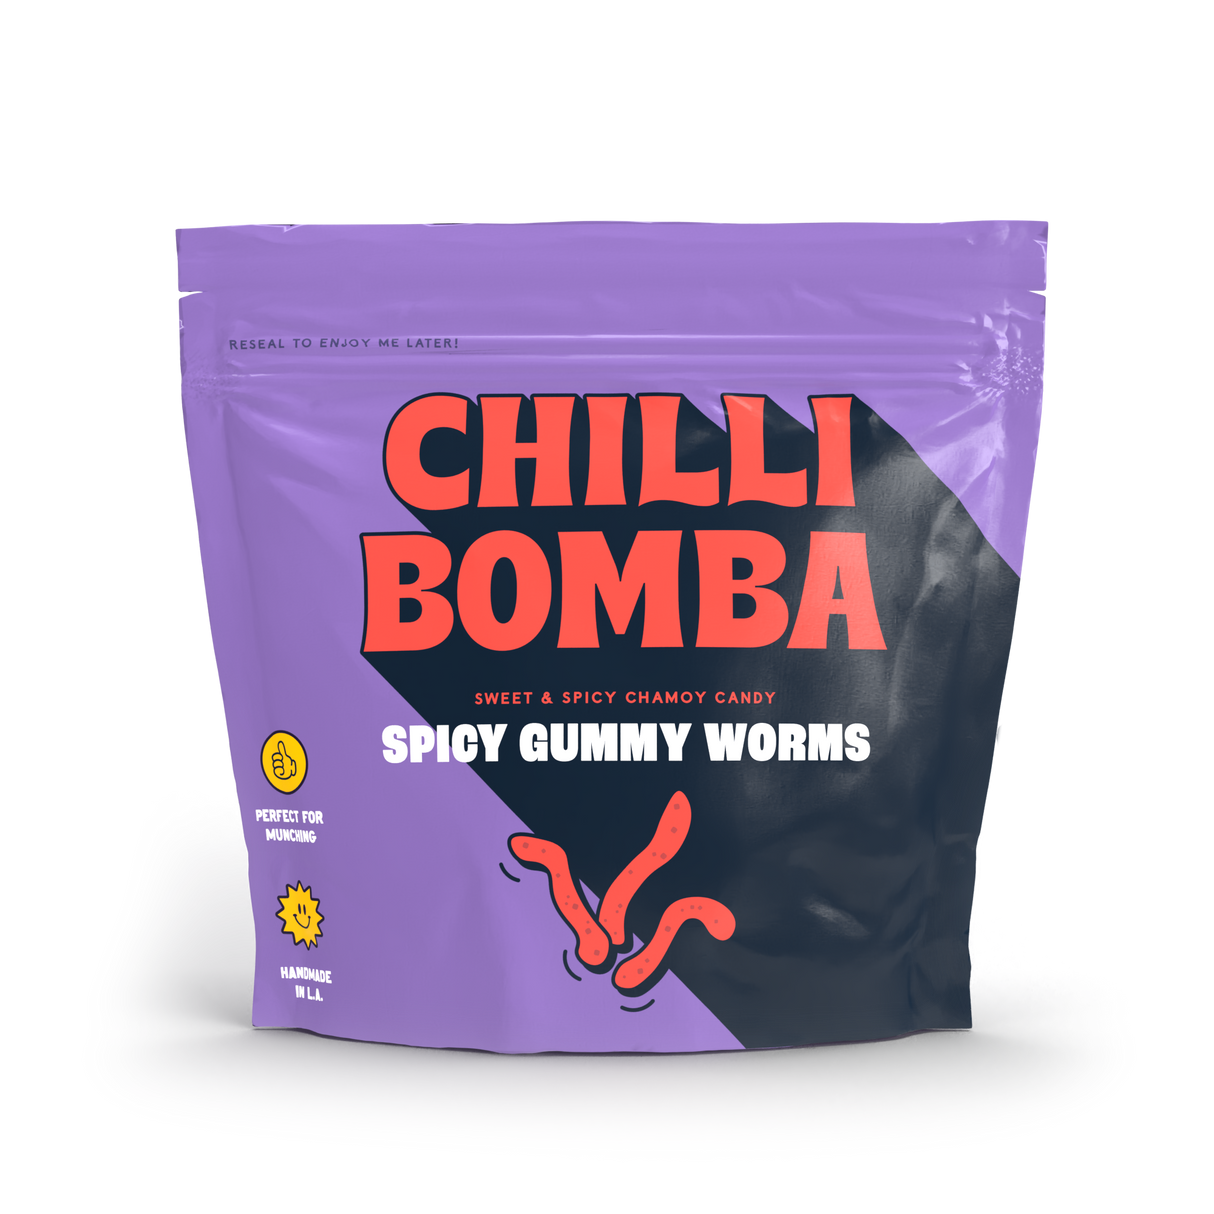 CHILLY BOMBA Chilli Bomba Spicy Gummy Worms 8oz package front view on a seamless white background